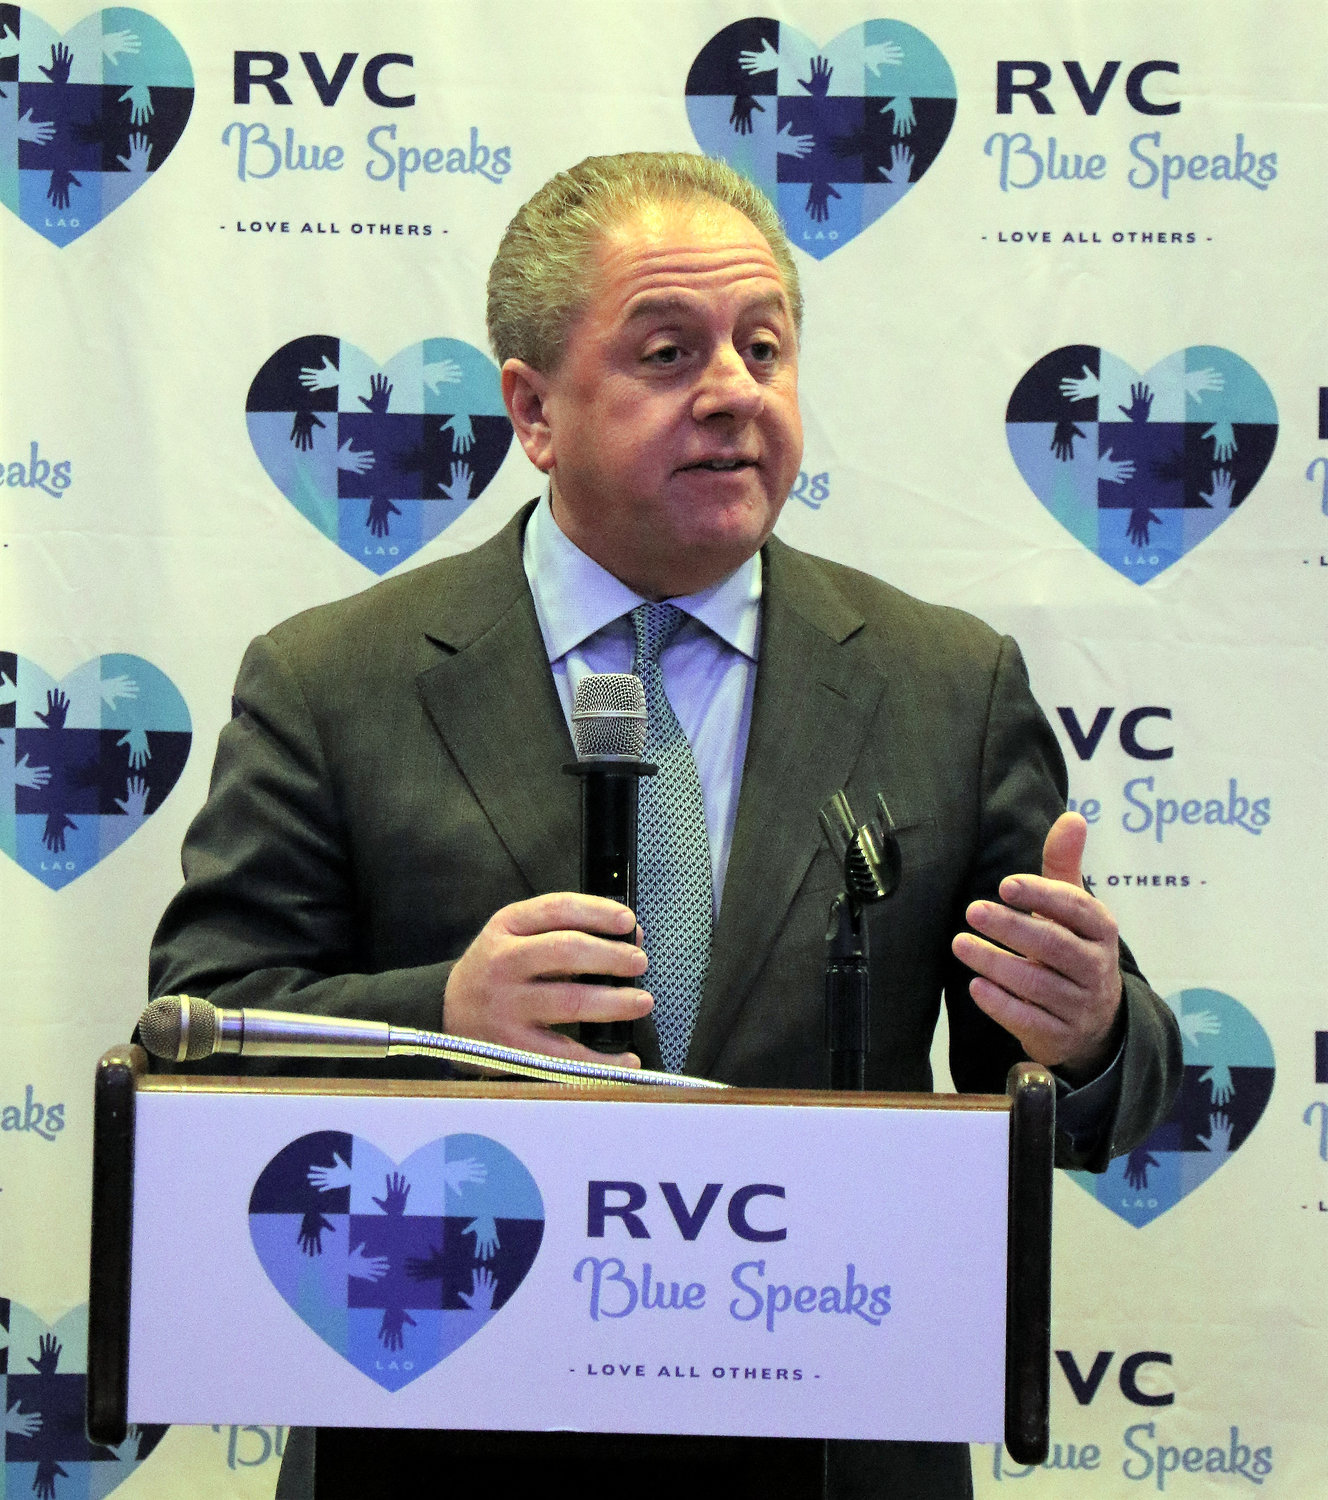 RVC Blue Speaks honored local businessman Butch Yamali for his generosity to the organization.